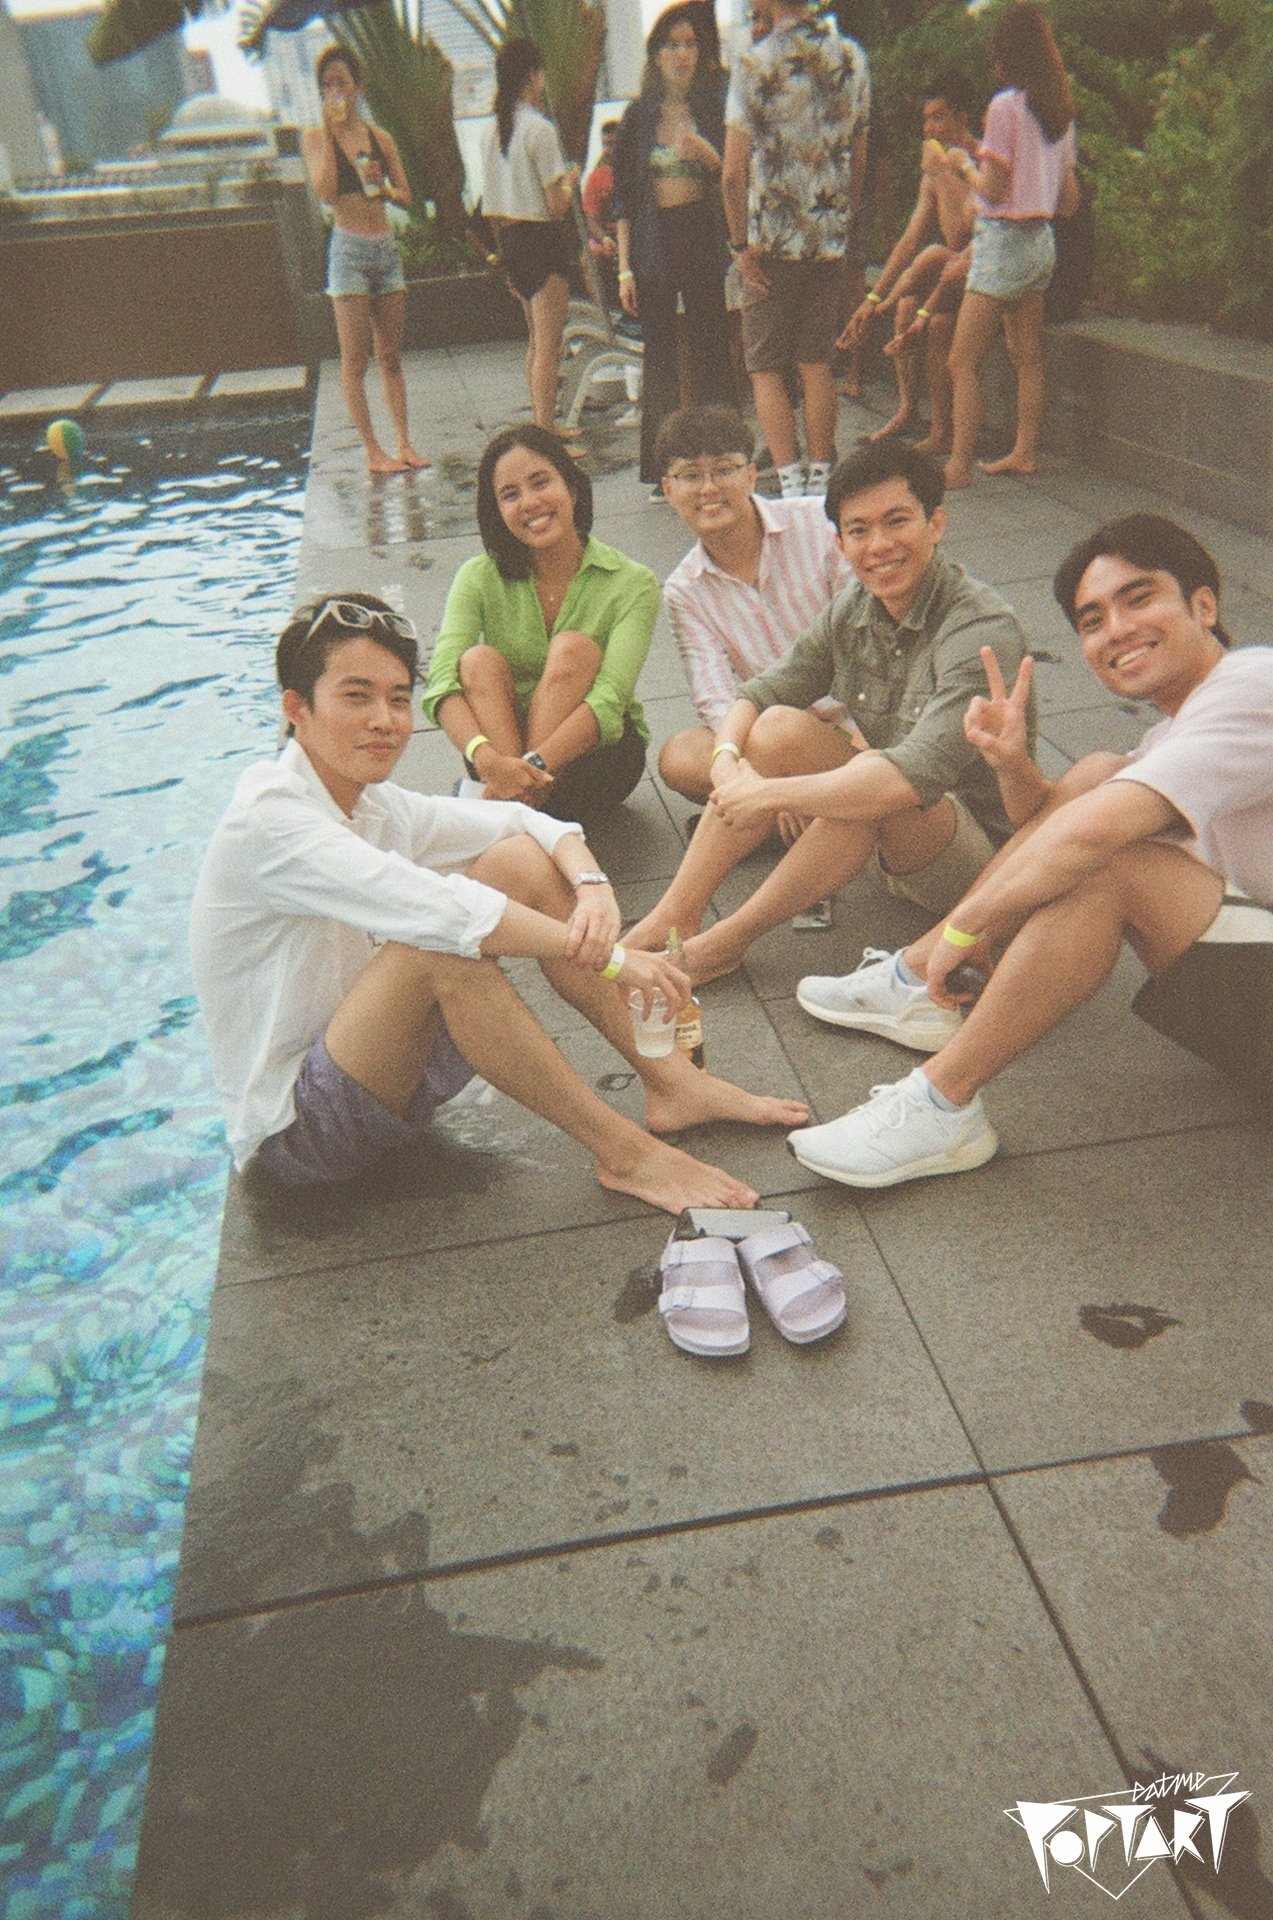  “Free feet - sorry its disposable cam quality tho” 